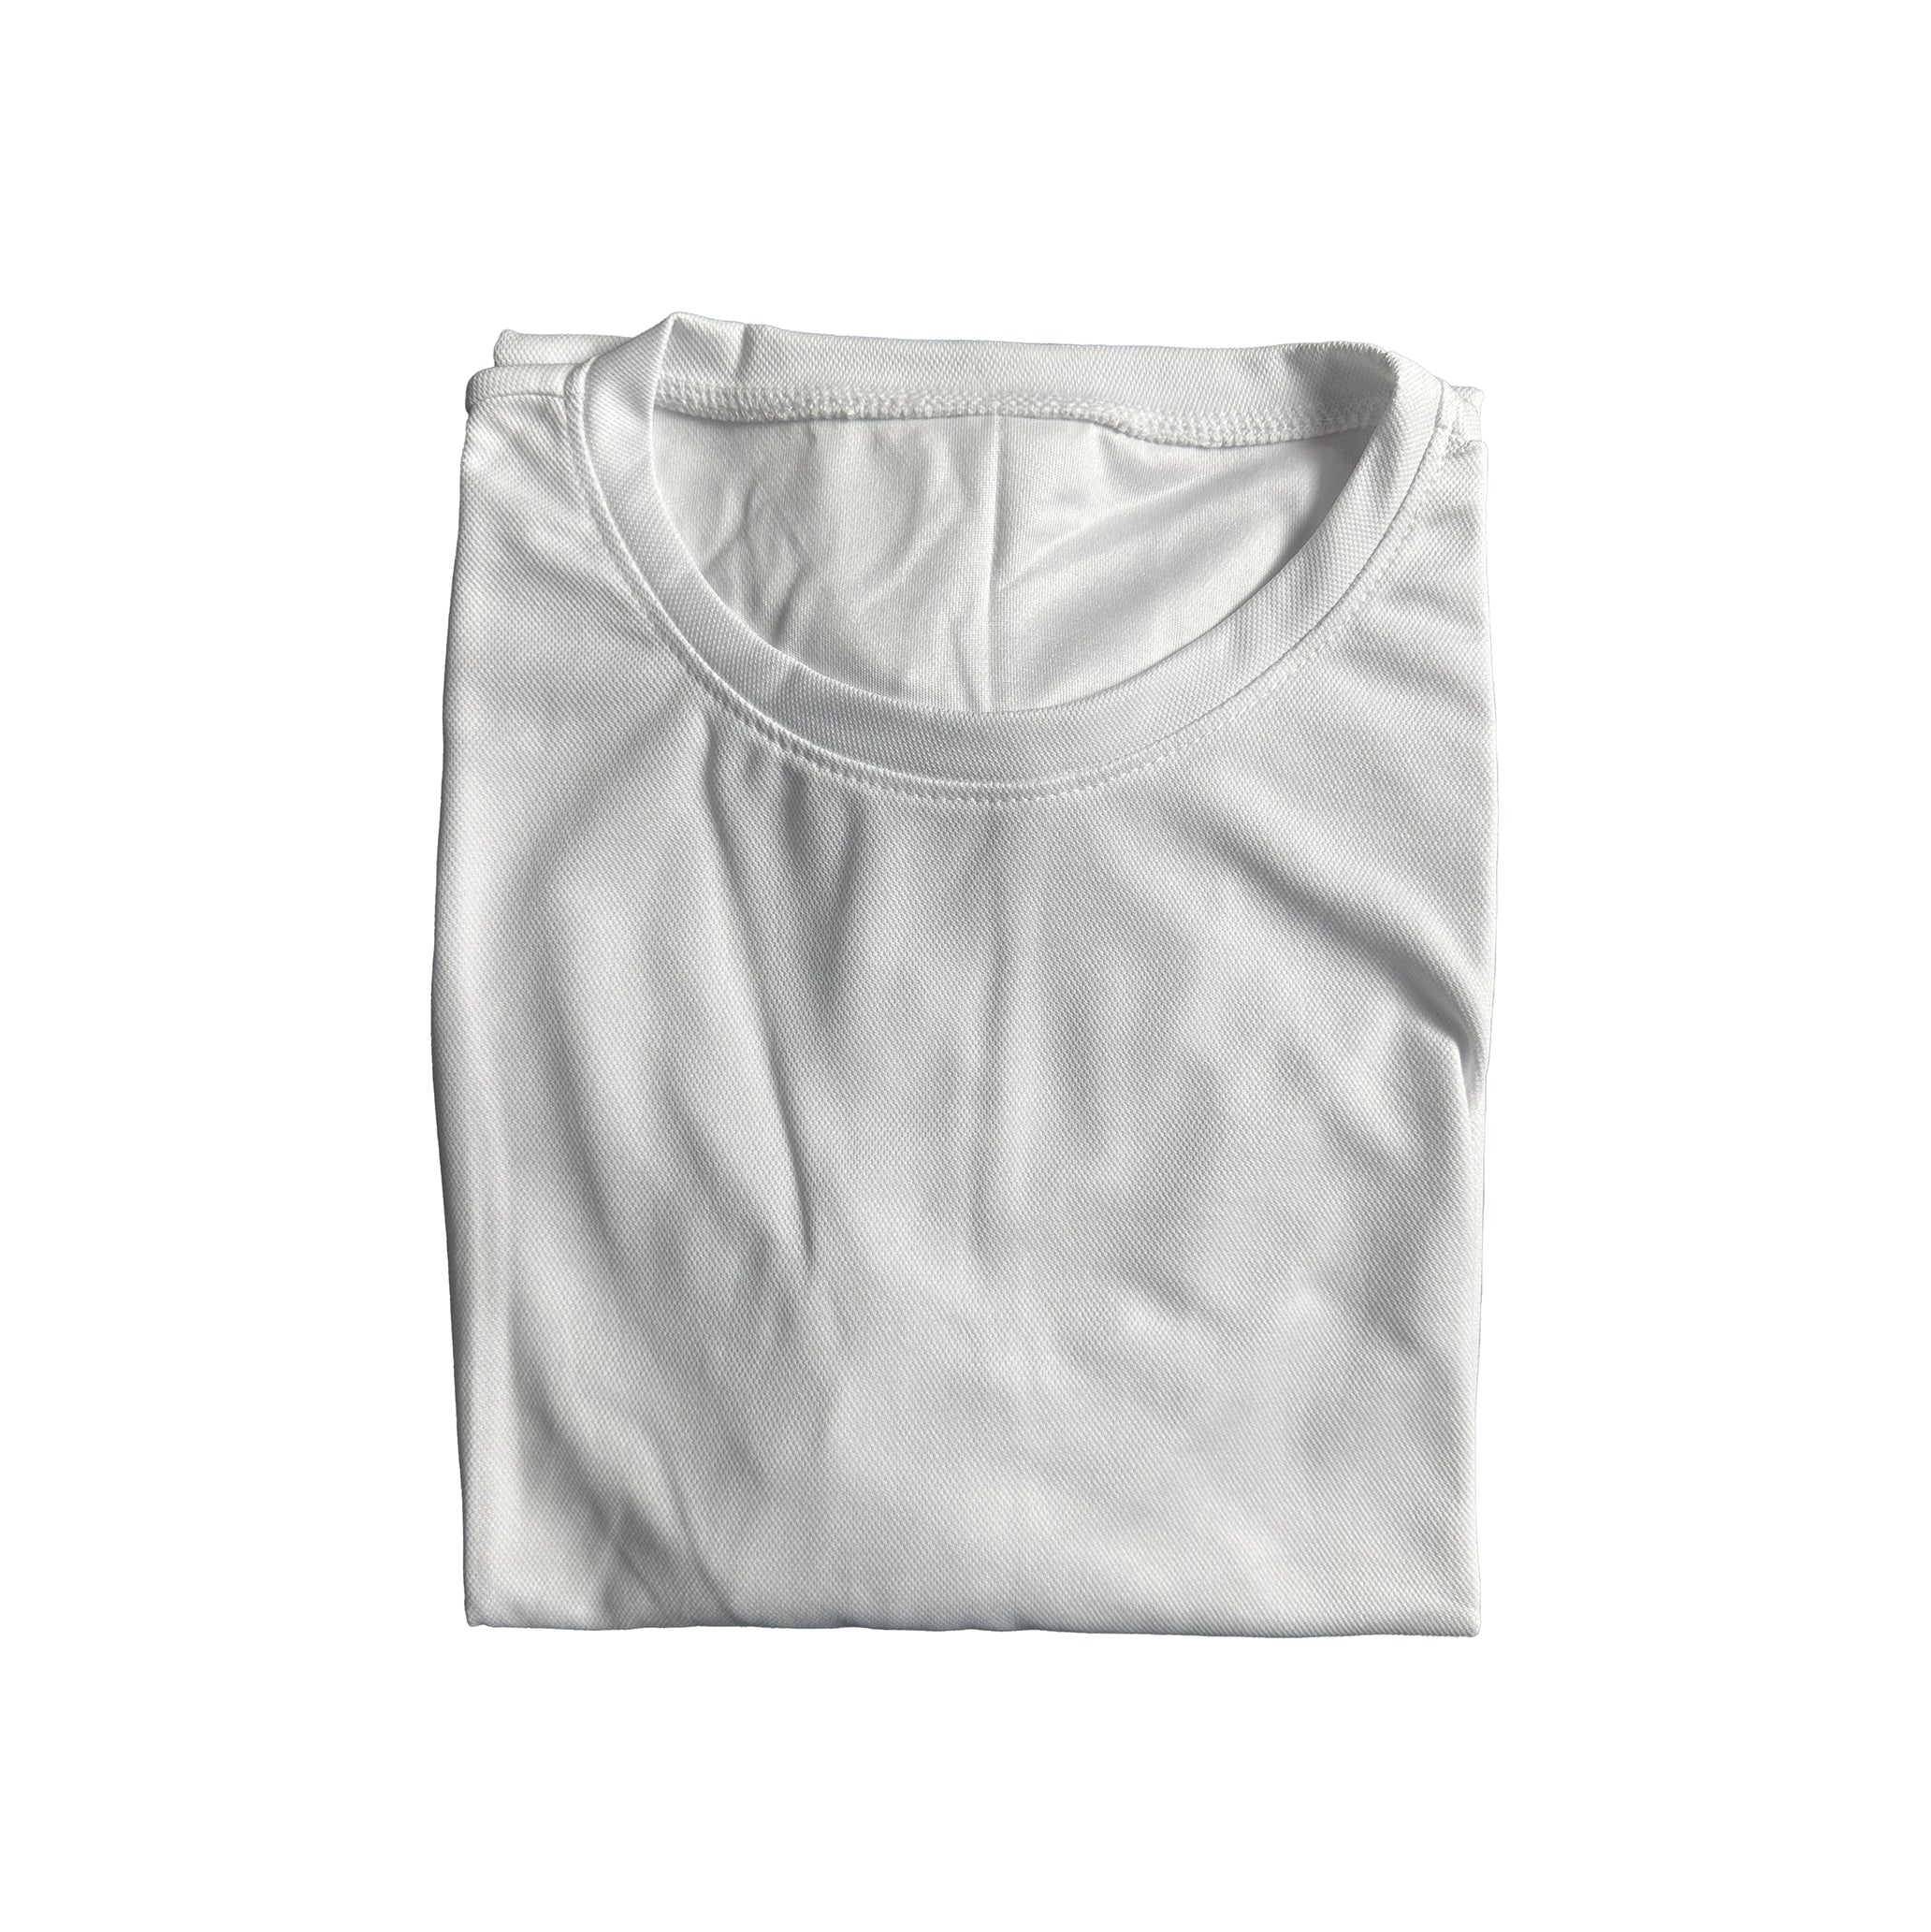 Bulk Deal: Lot of 80 White Classic Sublimation-Ready T-Shirts - Perfect for Customization and Resale